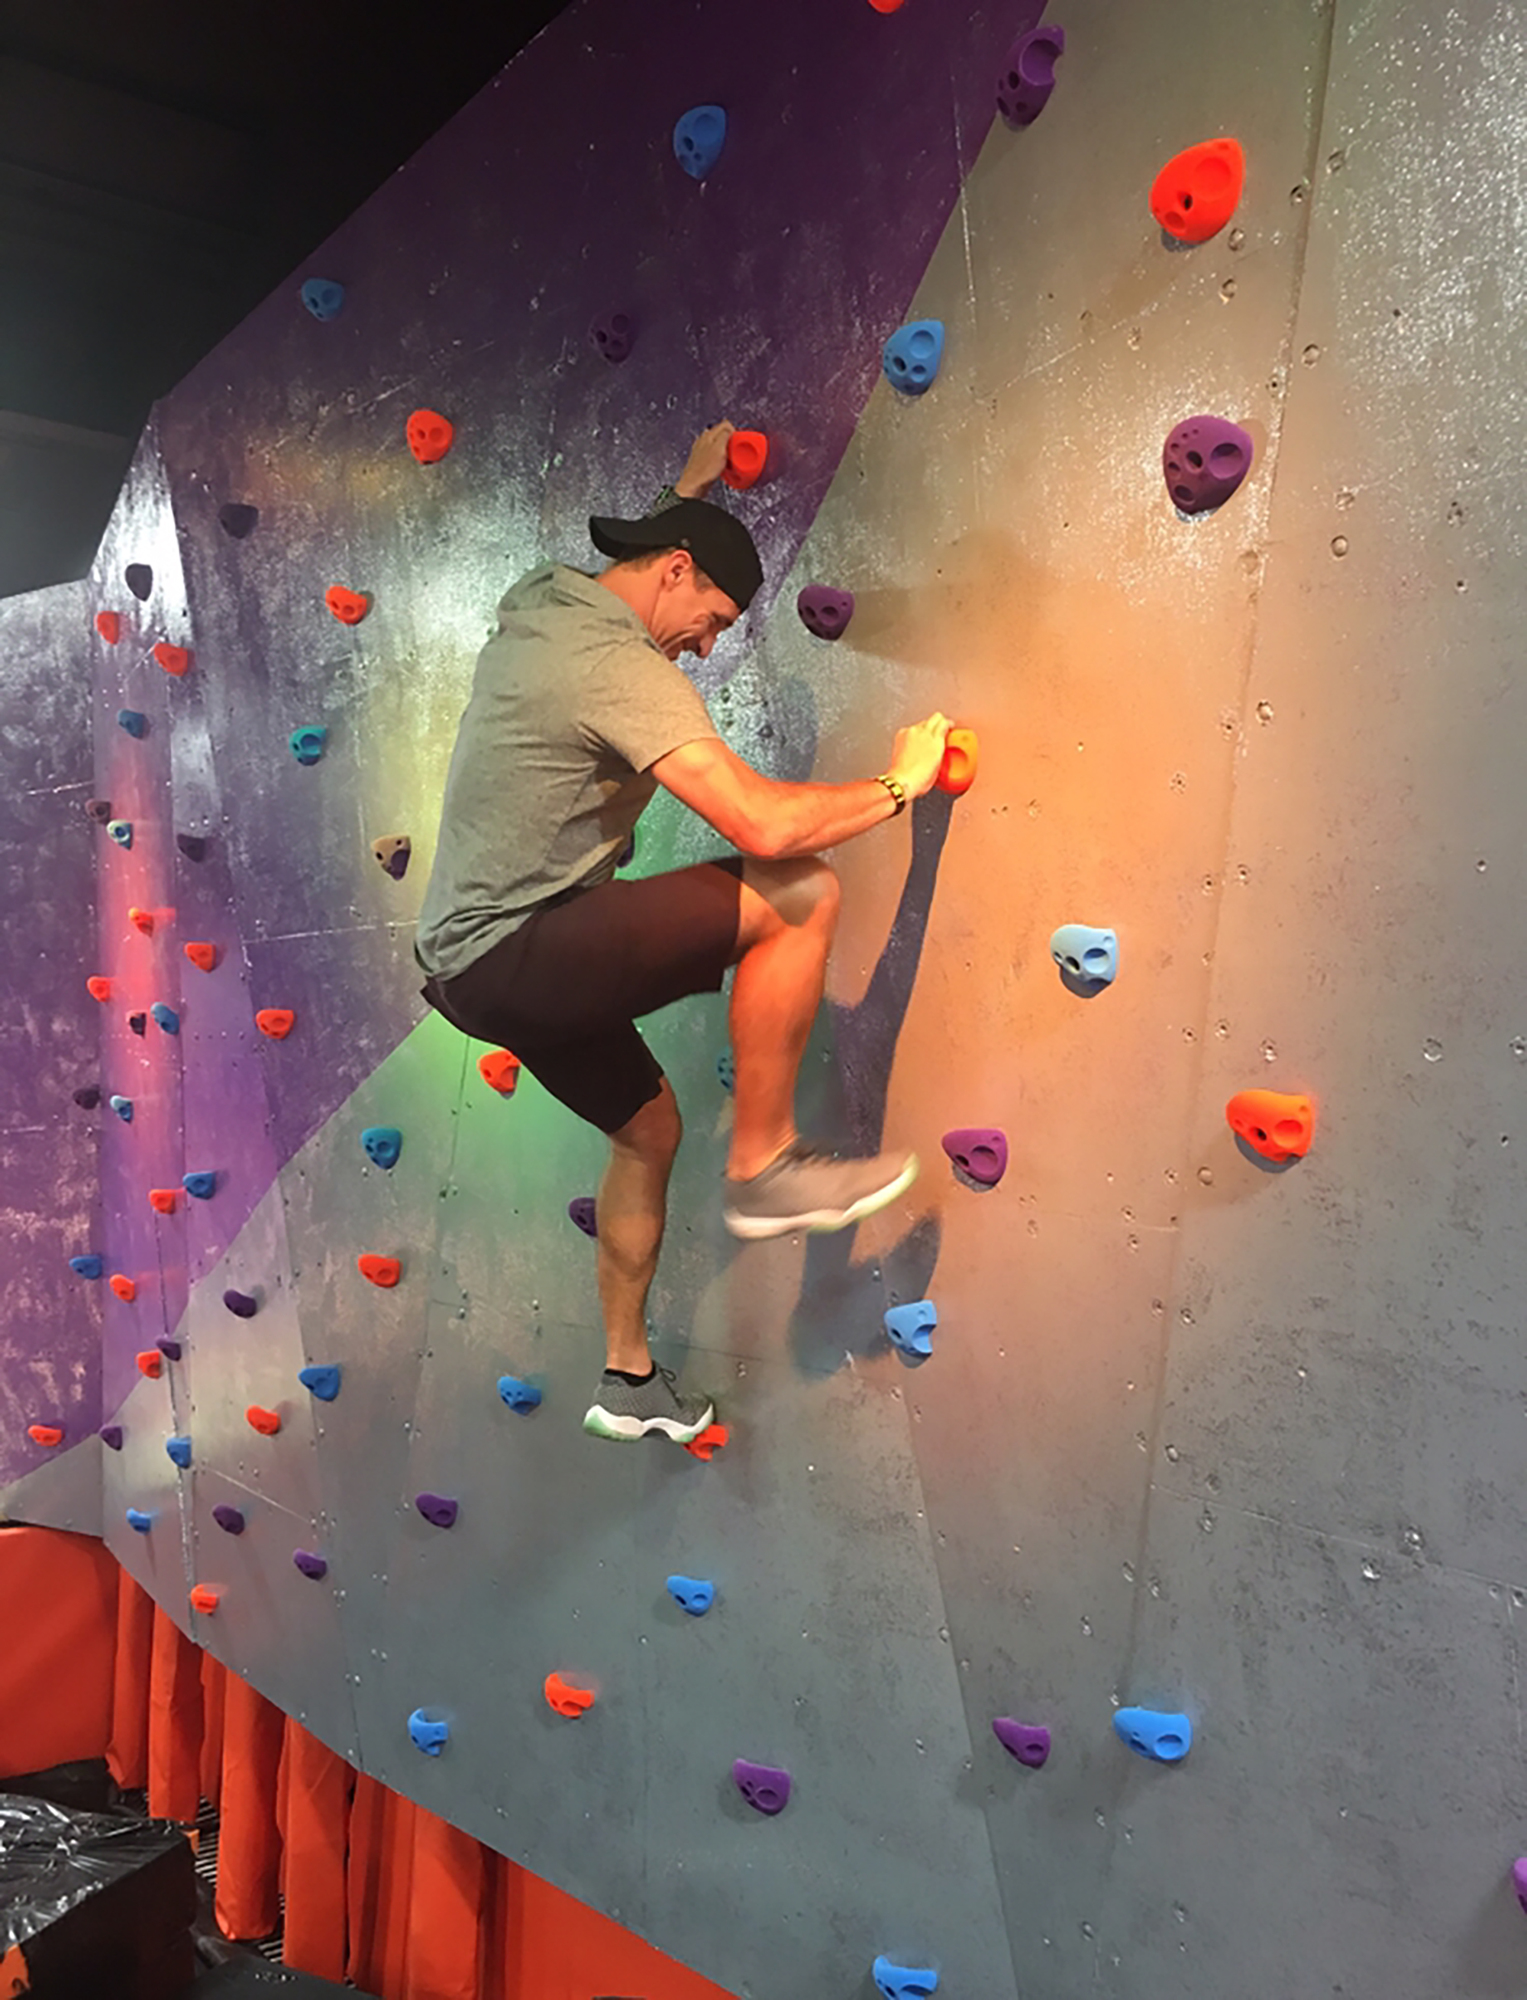 Climbing walls are among the features of Surge Adventure Park